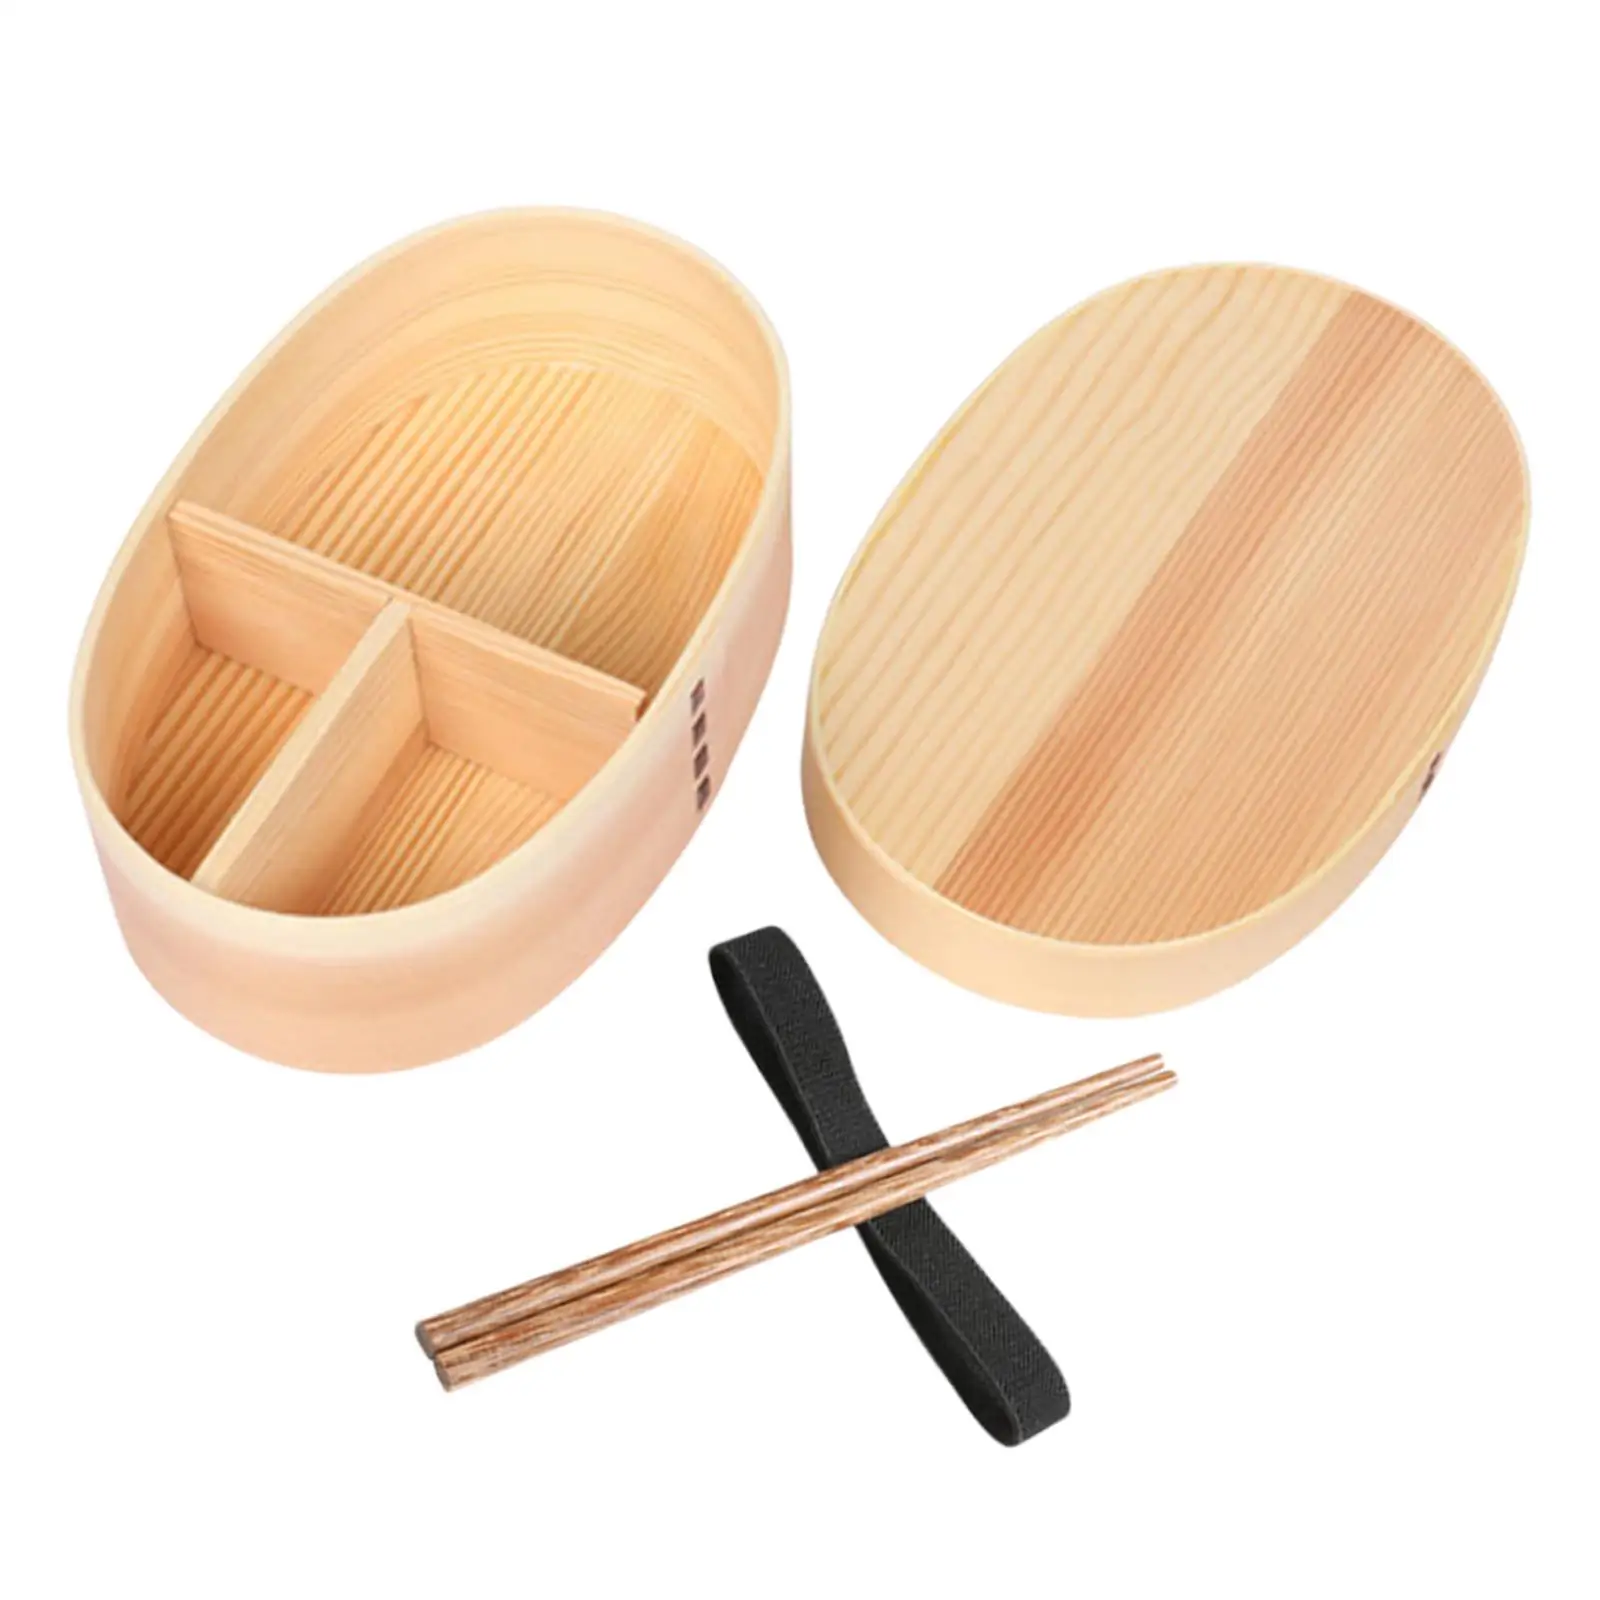 Japanese Style Bento Box Wood Lunch Box with Chopsticks for Storage Sushi, Vegetable, Rice etc Tableware Bowl Container